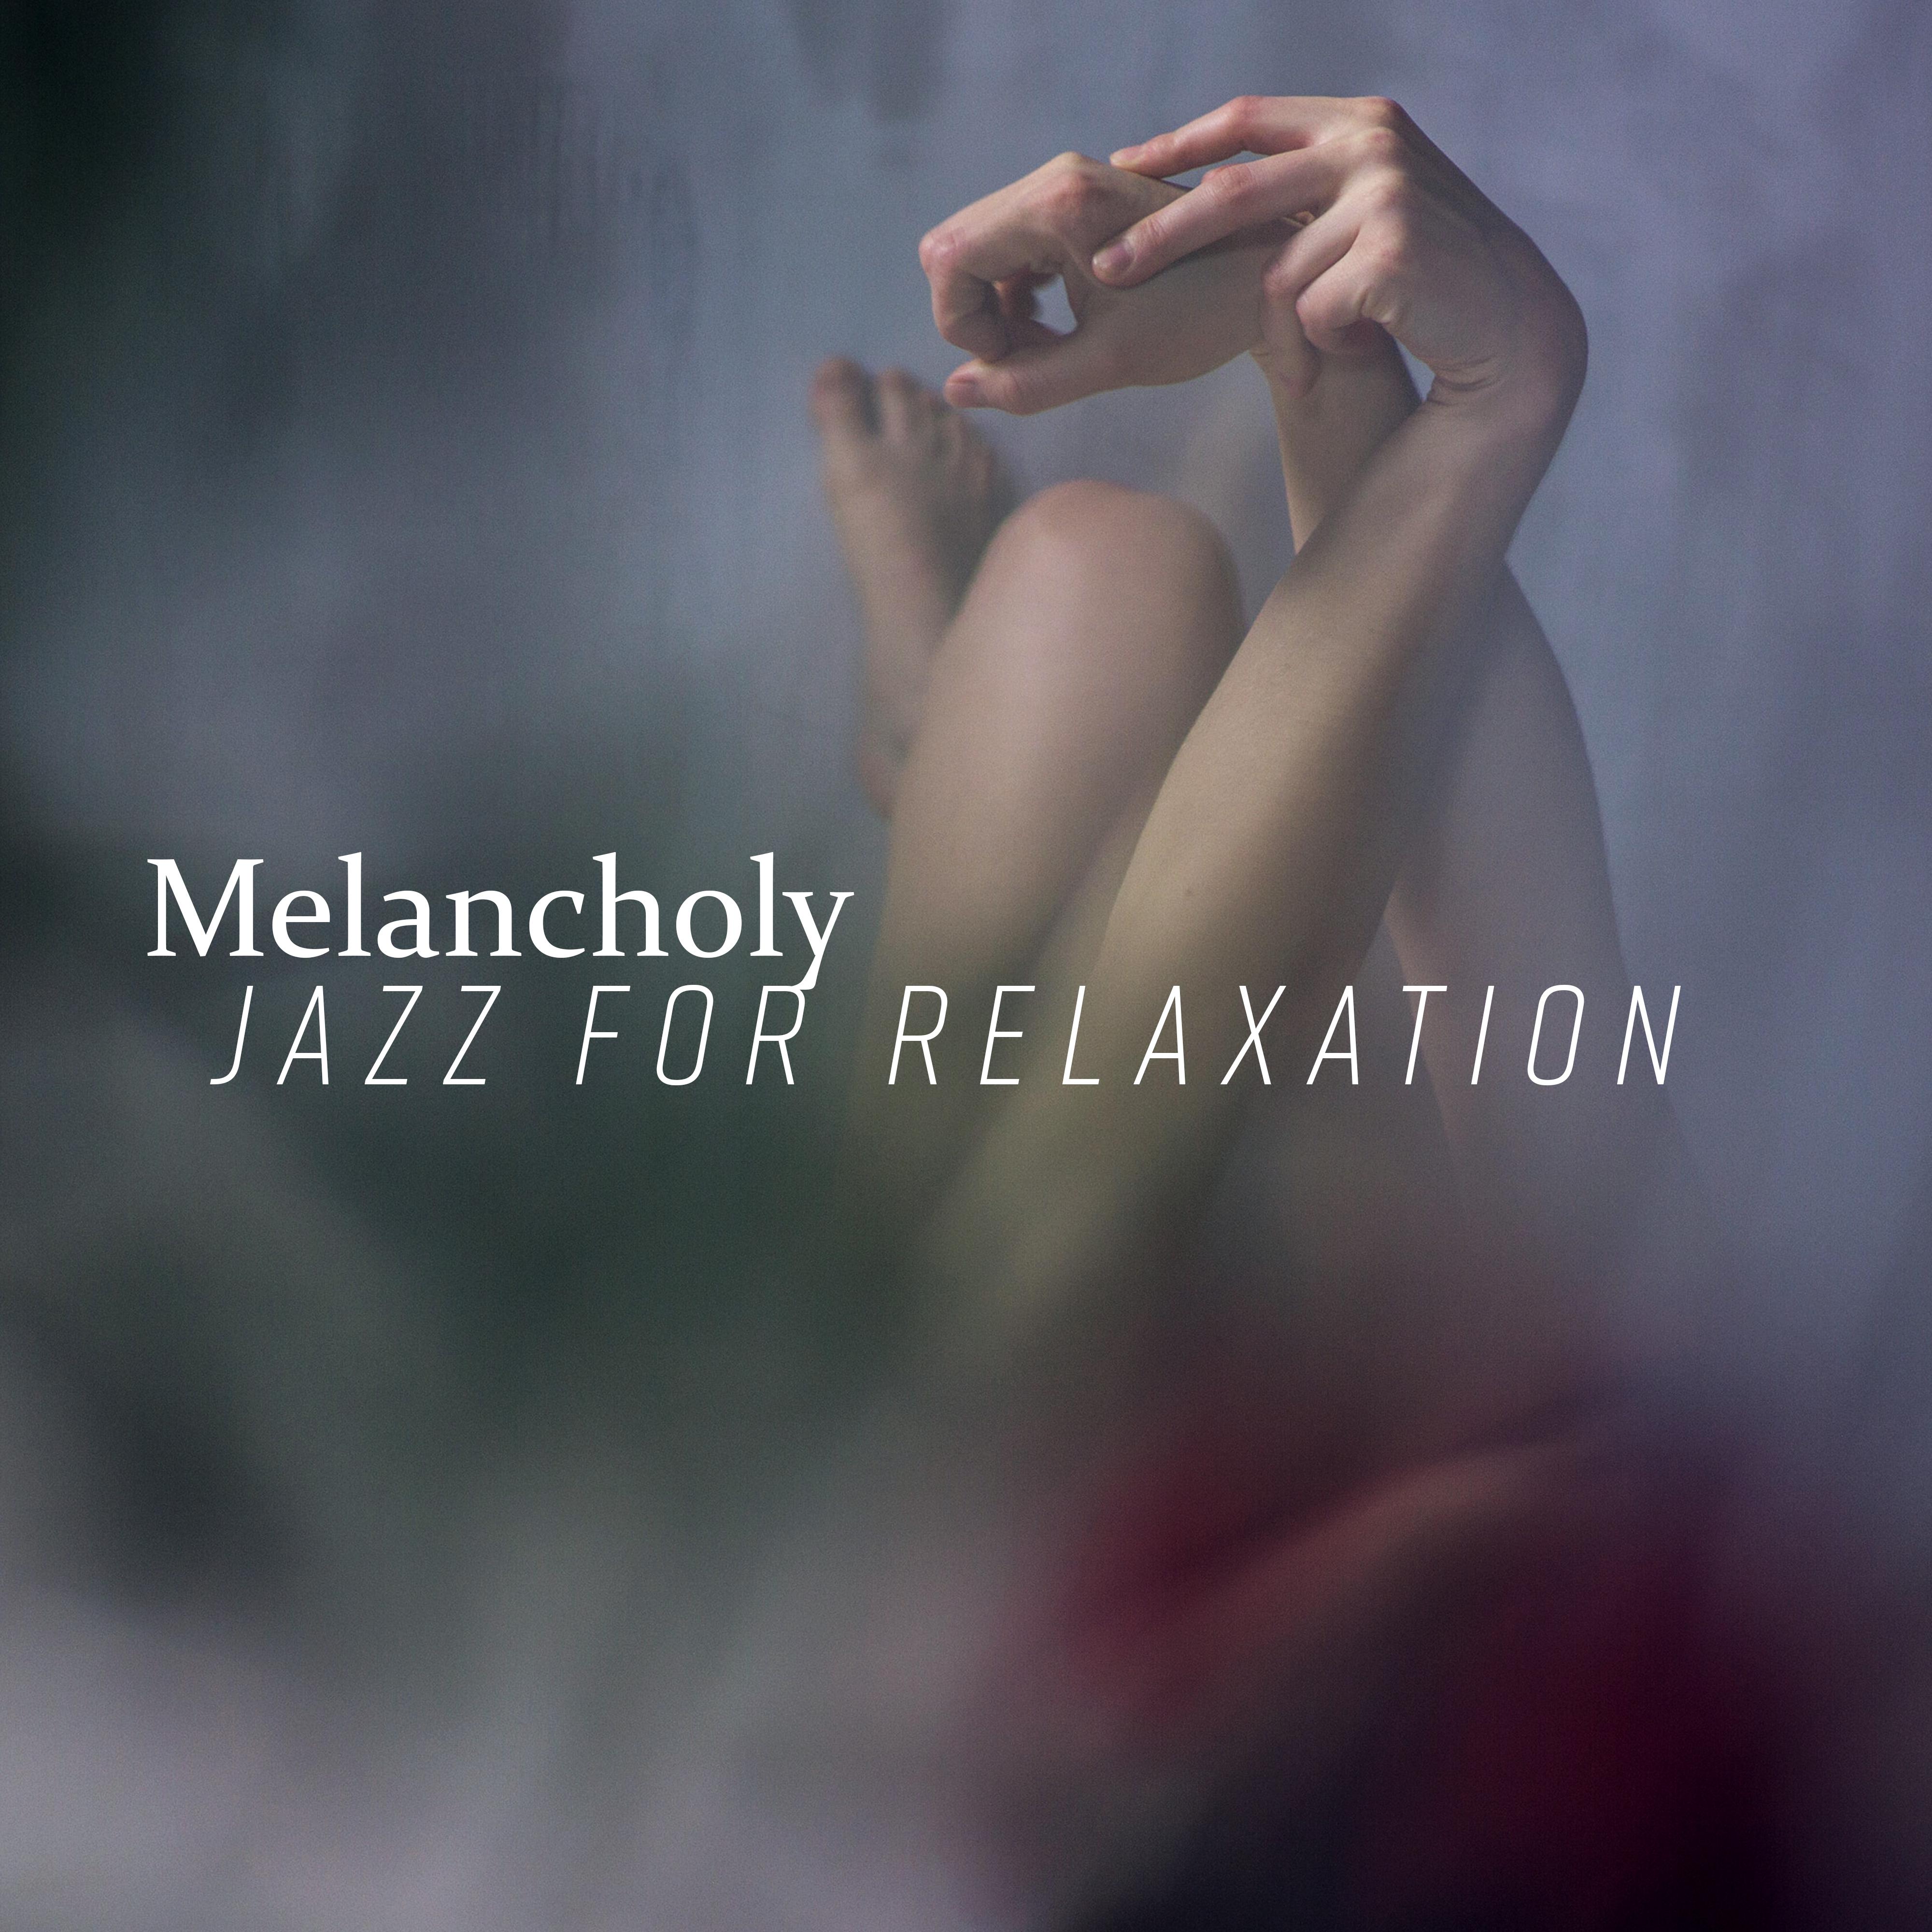 Melancholy Jazz for Relaxation